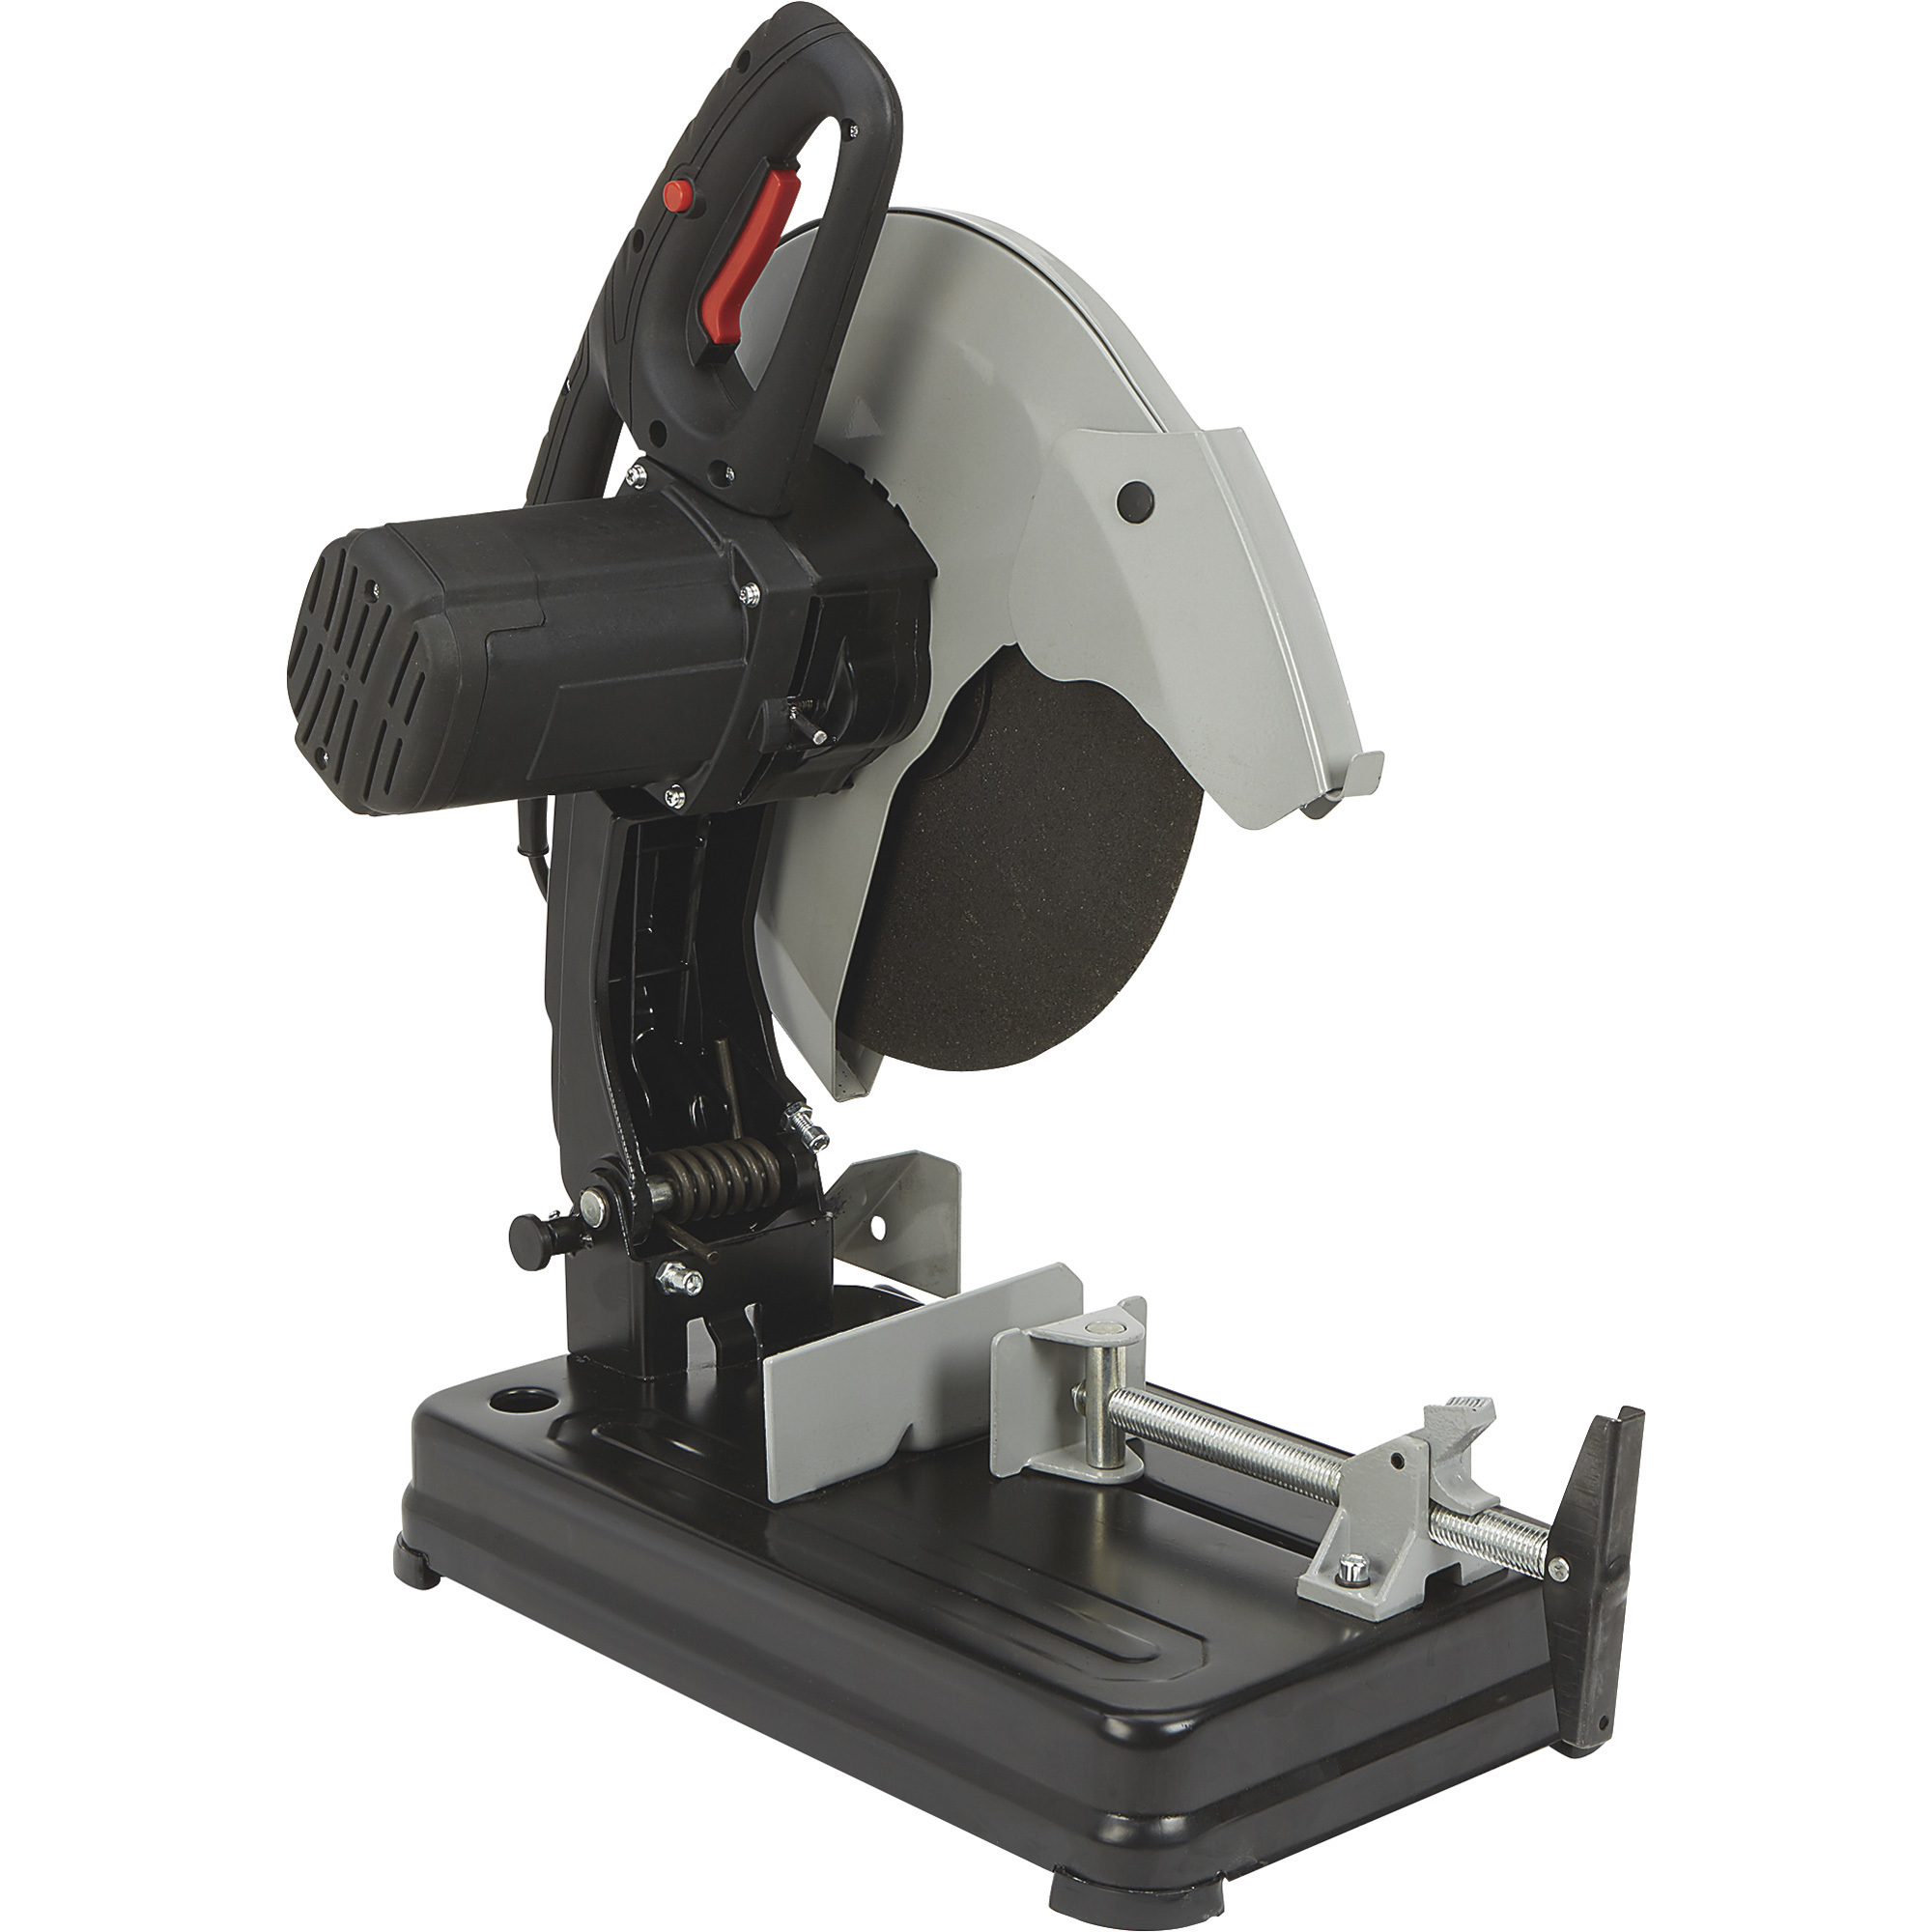 Please see replacement Item# 4975091. Ironton Abrasive Chop Saw — 14in., 15  Amp Northern Tool